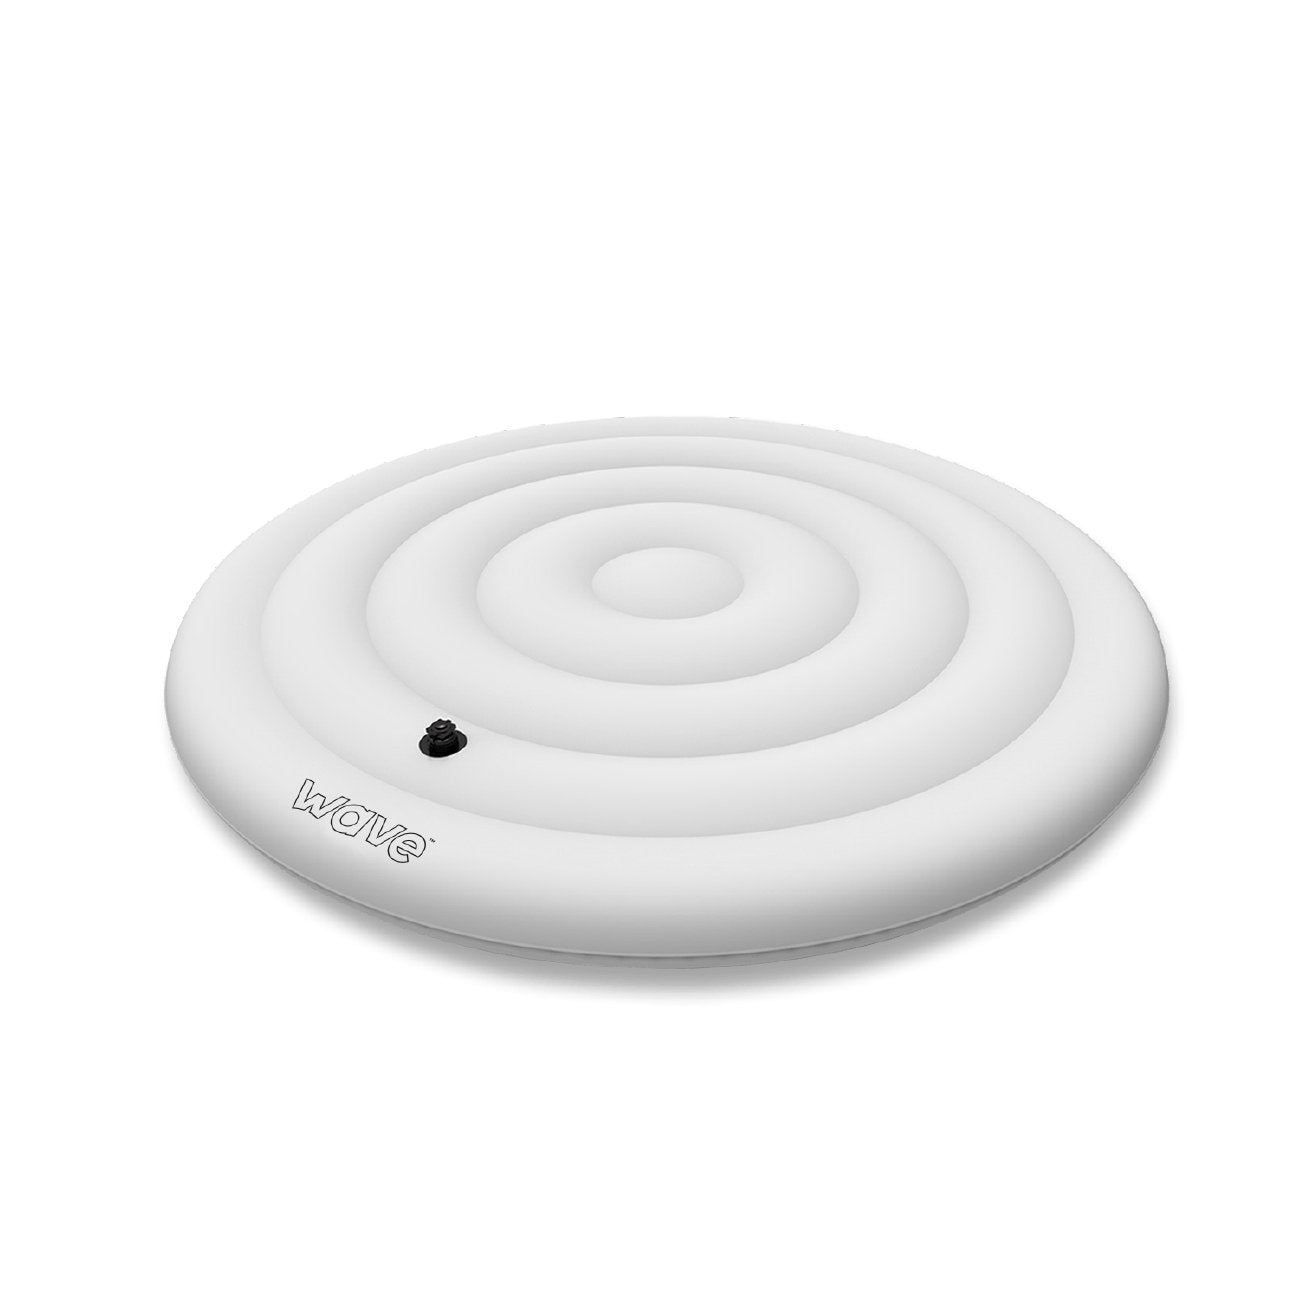 Round 4 Person Protective Thermal Efficient Inflatable Hot Tub Cover, White - Wave Spas Europe